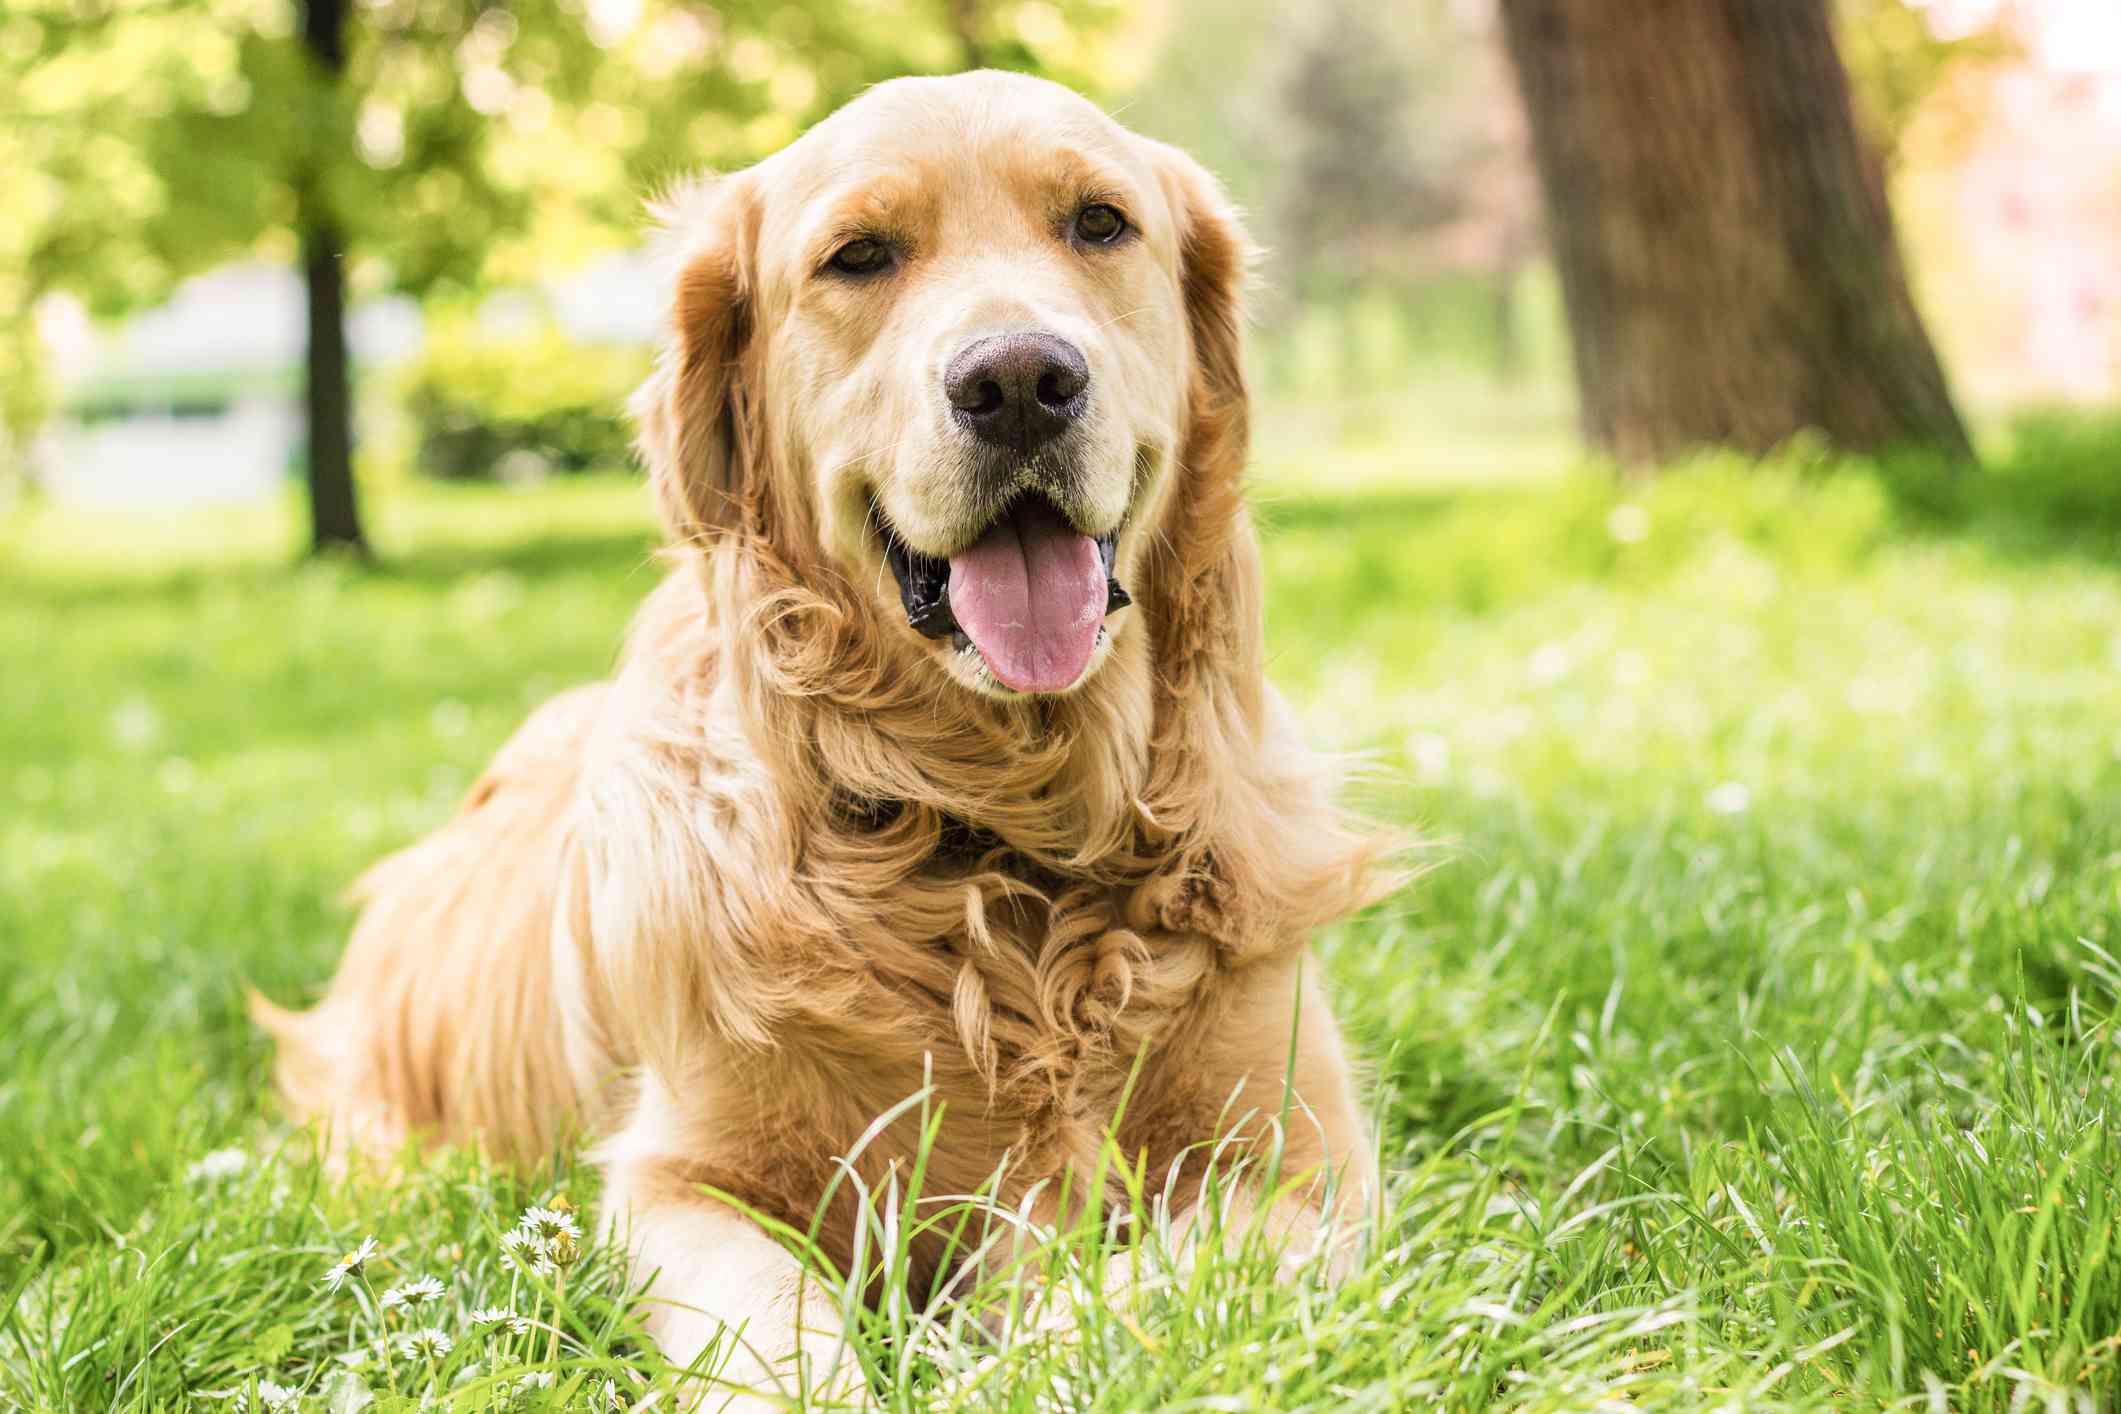 Golden Retriever laying in grass and staring at the camera with a smile